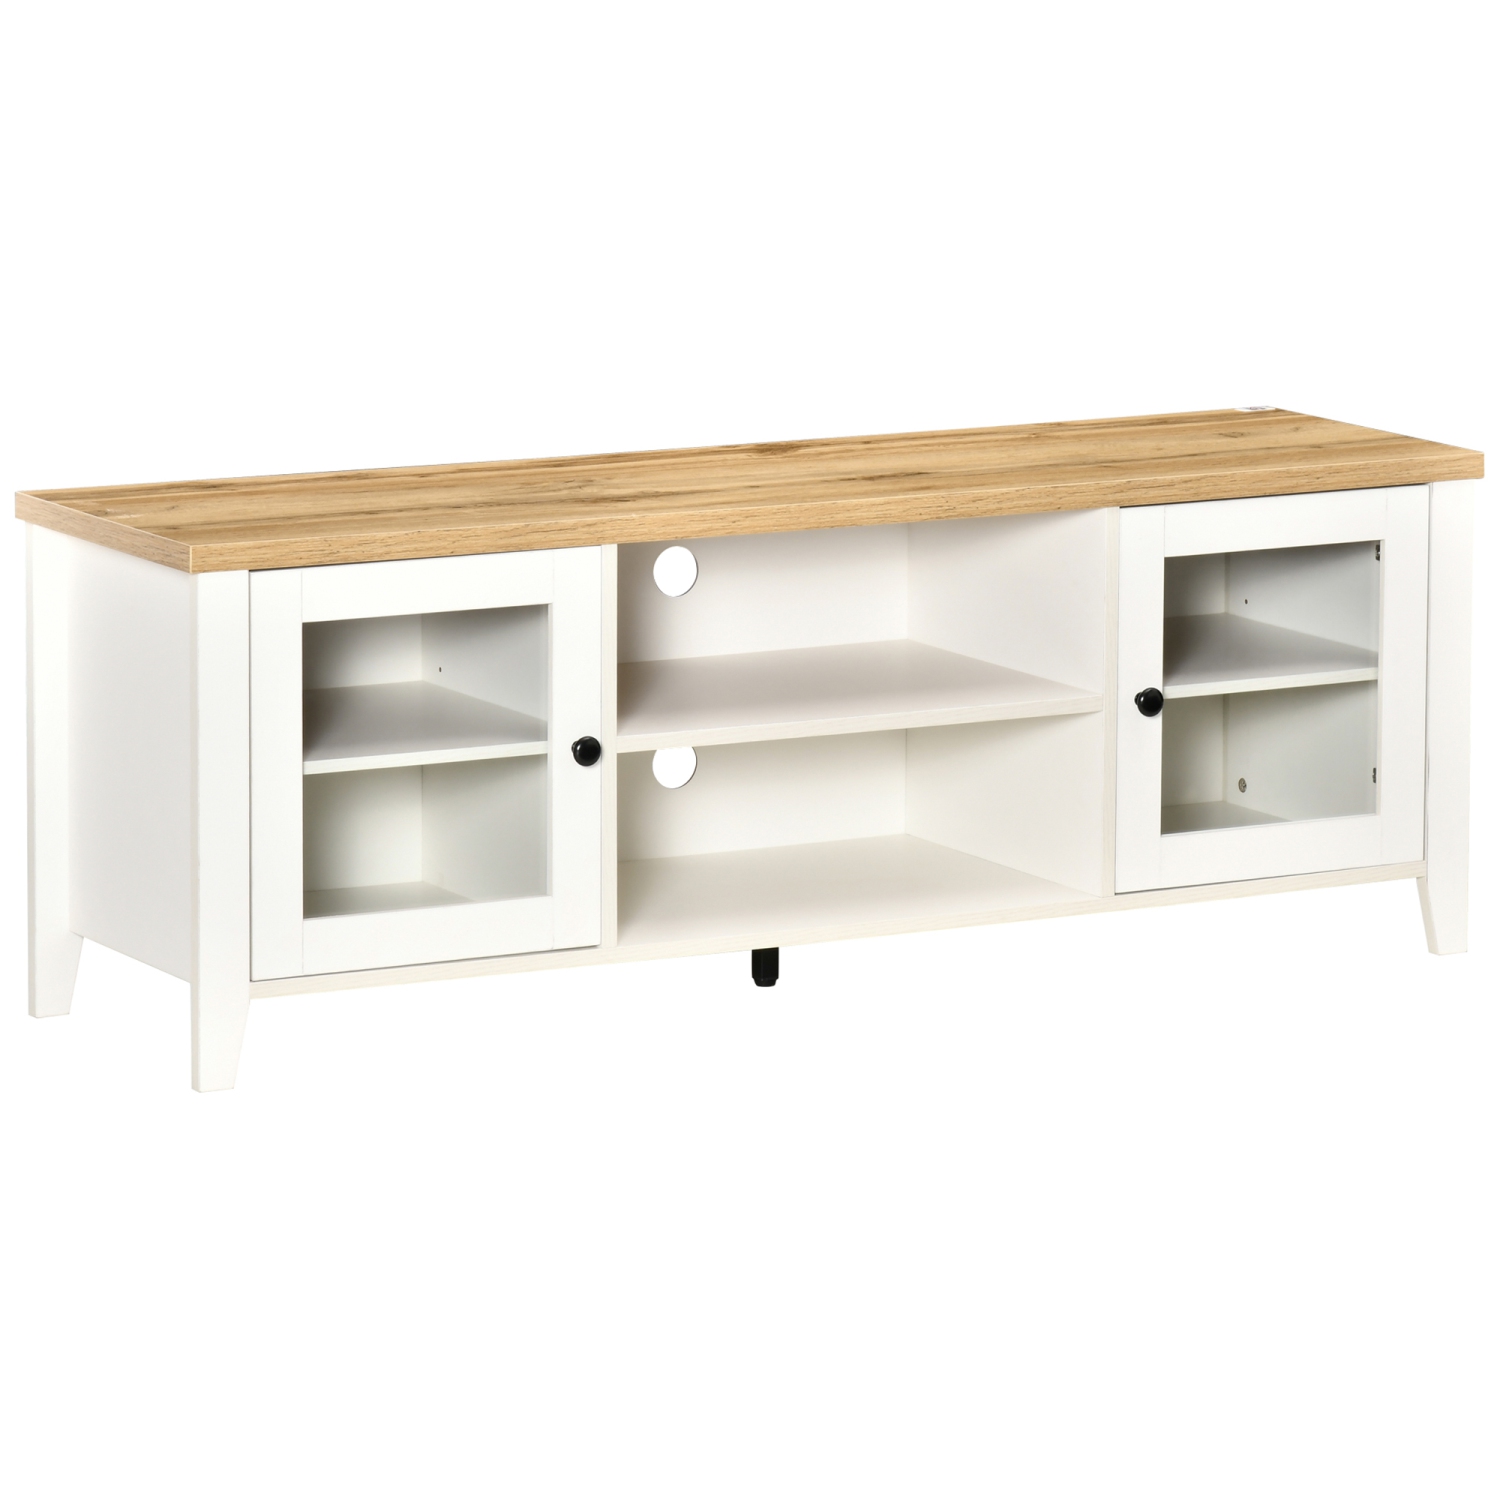 HOMCOM Modern TV Stand with Storage Doors for TVs up to 60 inches in White and Oak